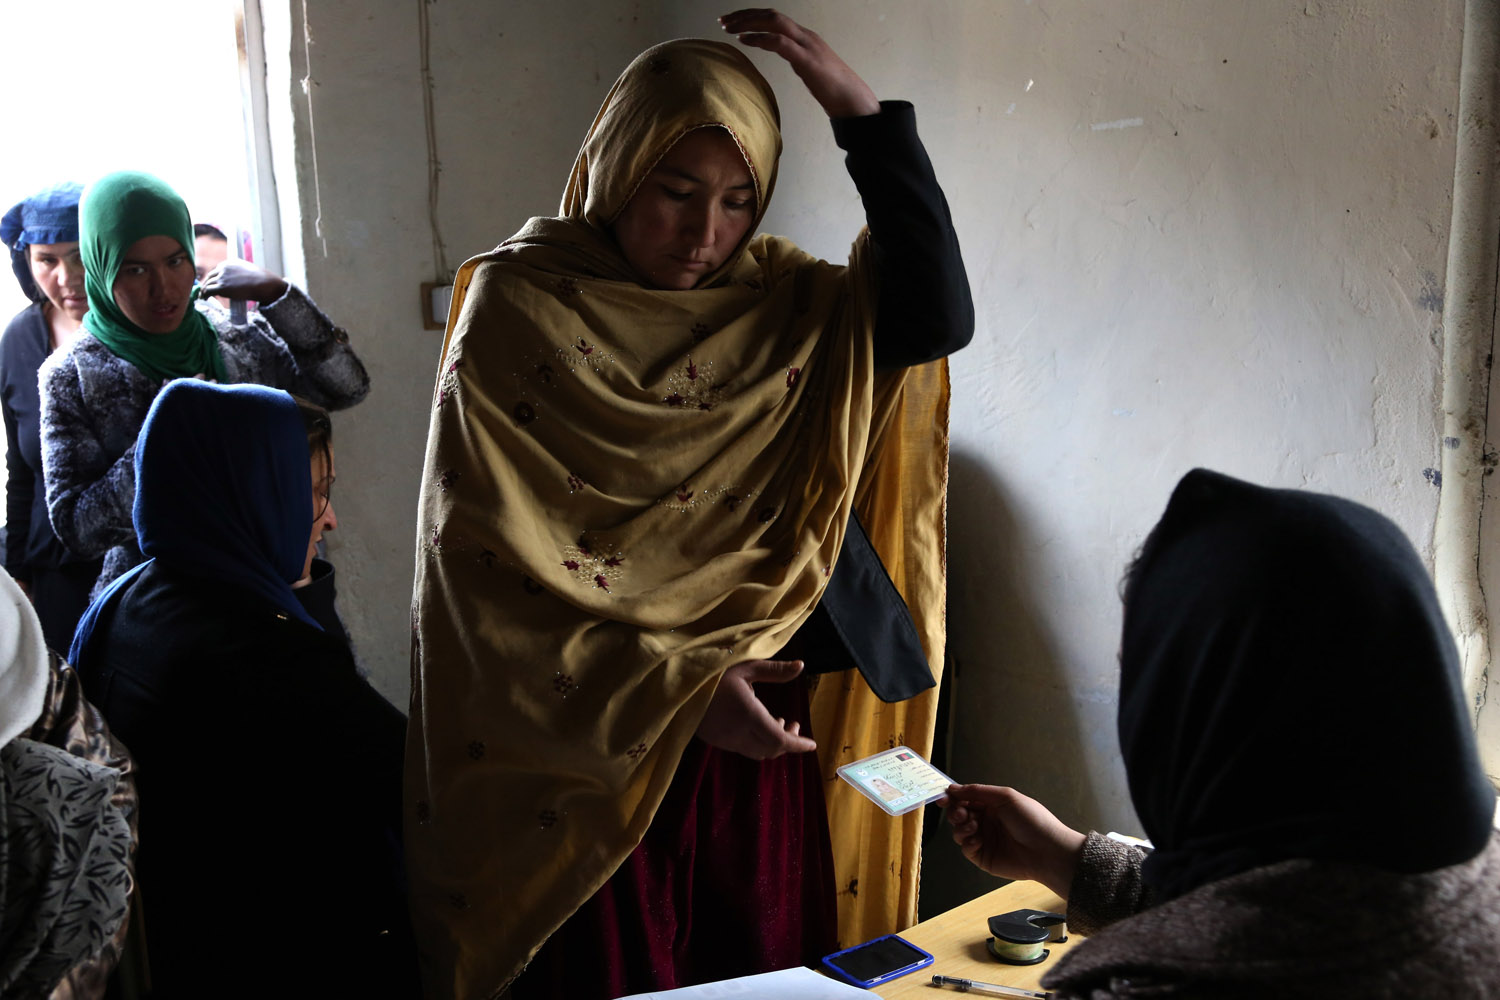 Mar. 17, 2014. An Afghan woman receives her voter registration card from an employee of the Afghan Independent Election Commission at a women's voter registration center in Kabul, Afghanistan.